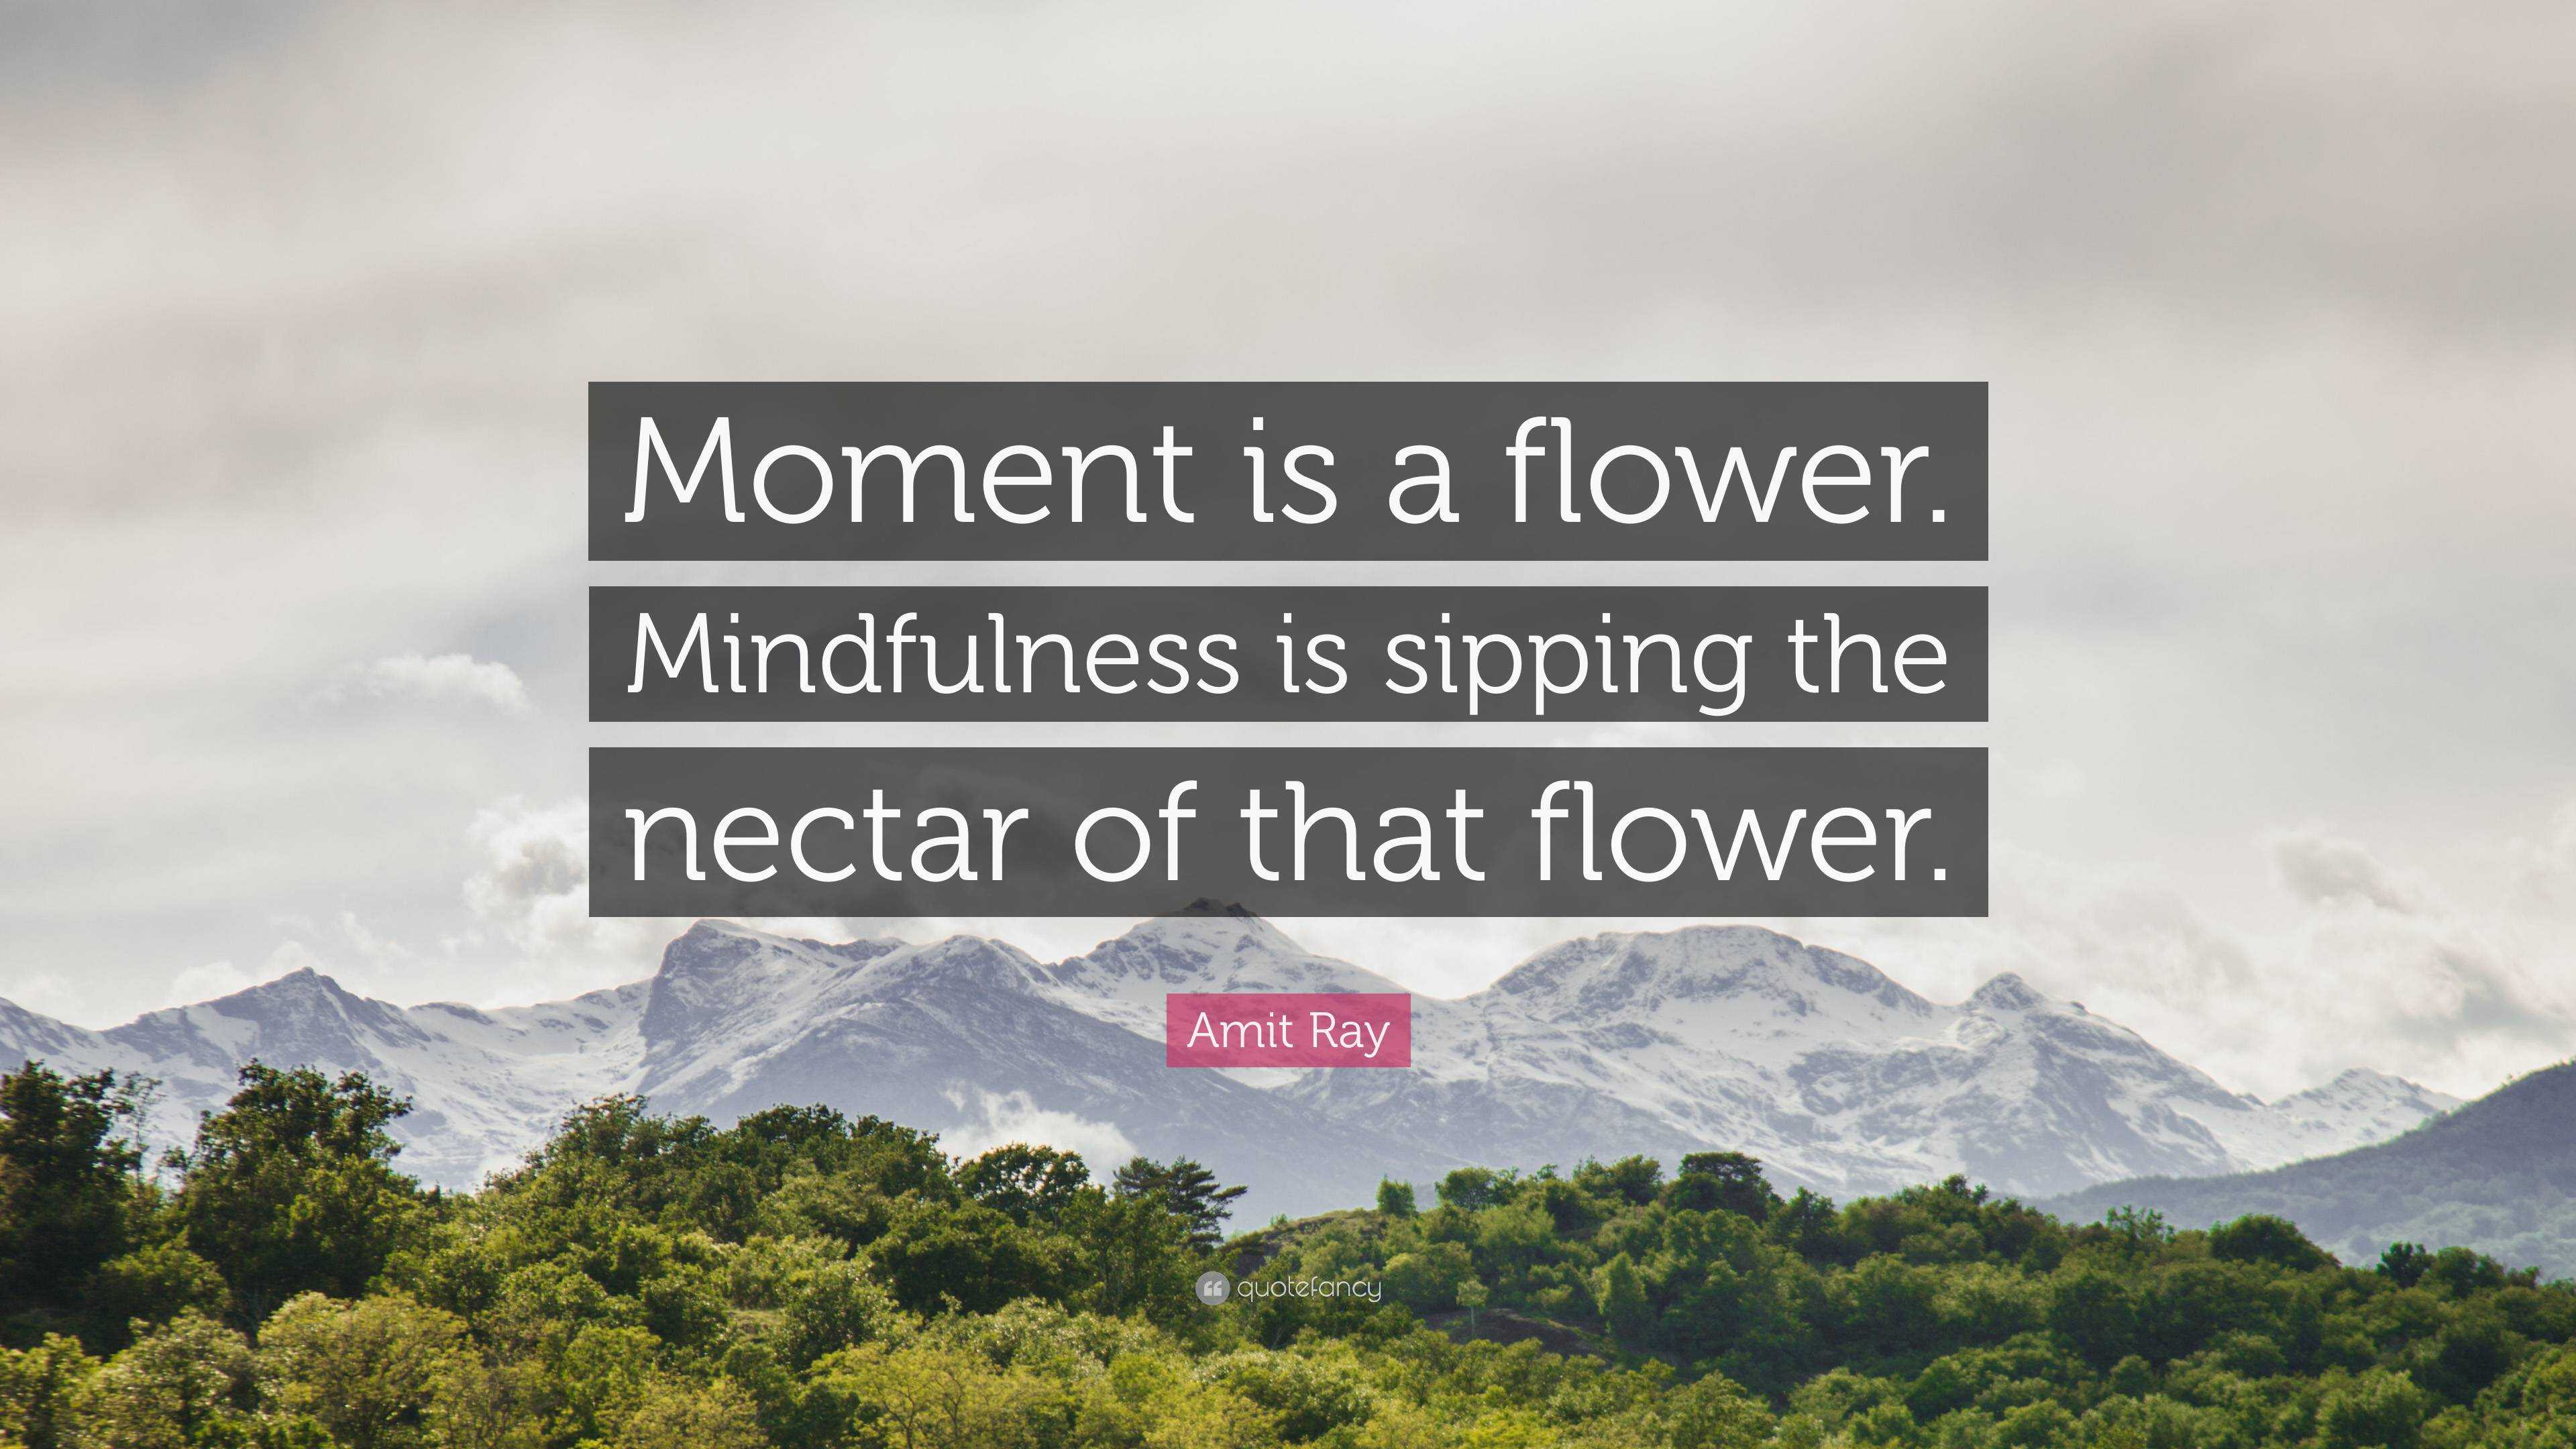 Amit Ray Quote: “Moment is a flower. Mindfulness is sipping the nectar ...